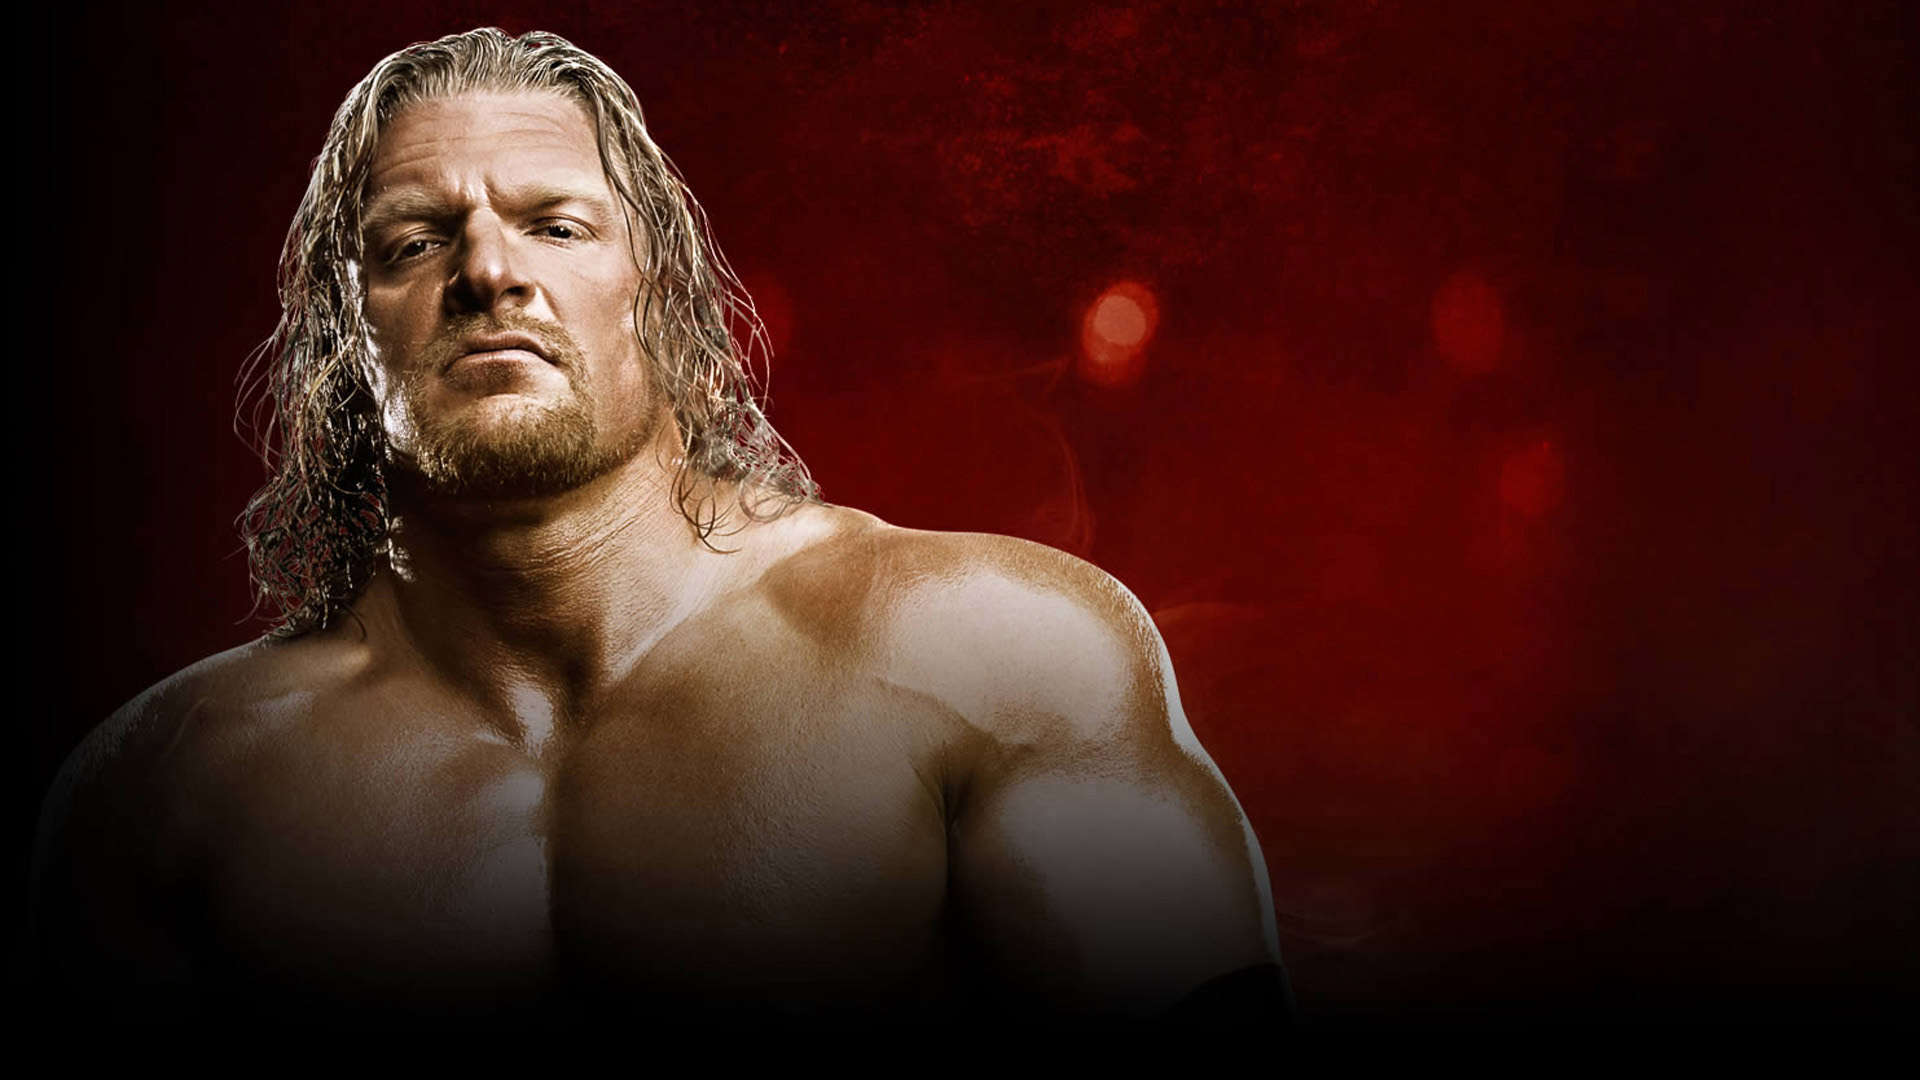 Wallpaper Triple H Wwe HD Upload At April By Mark